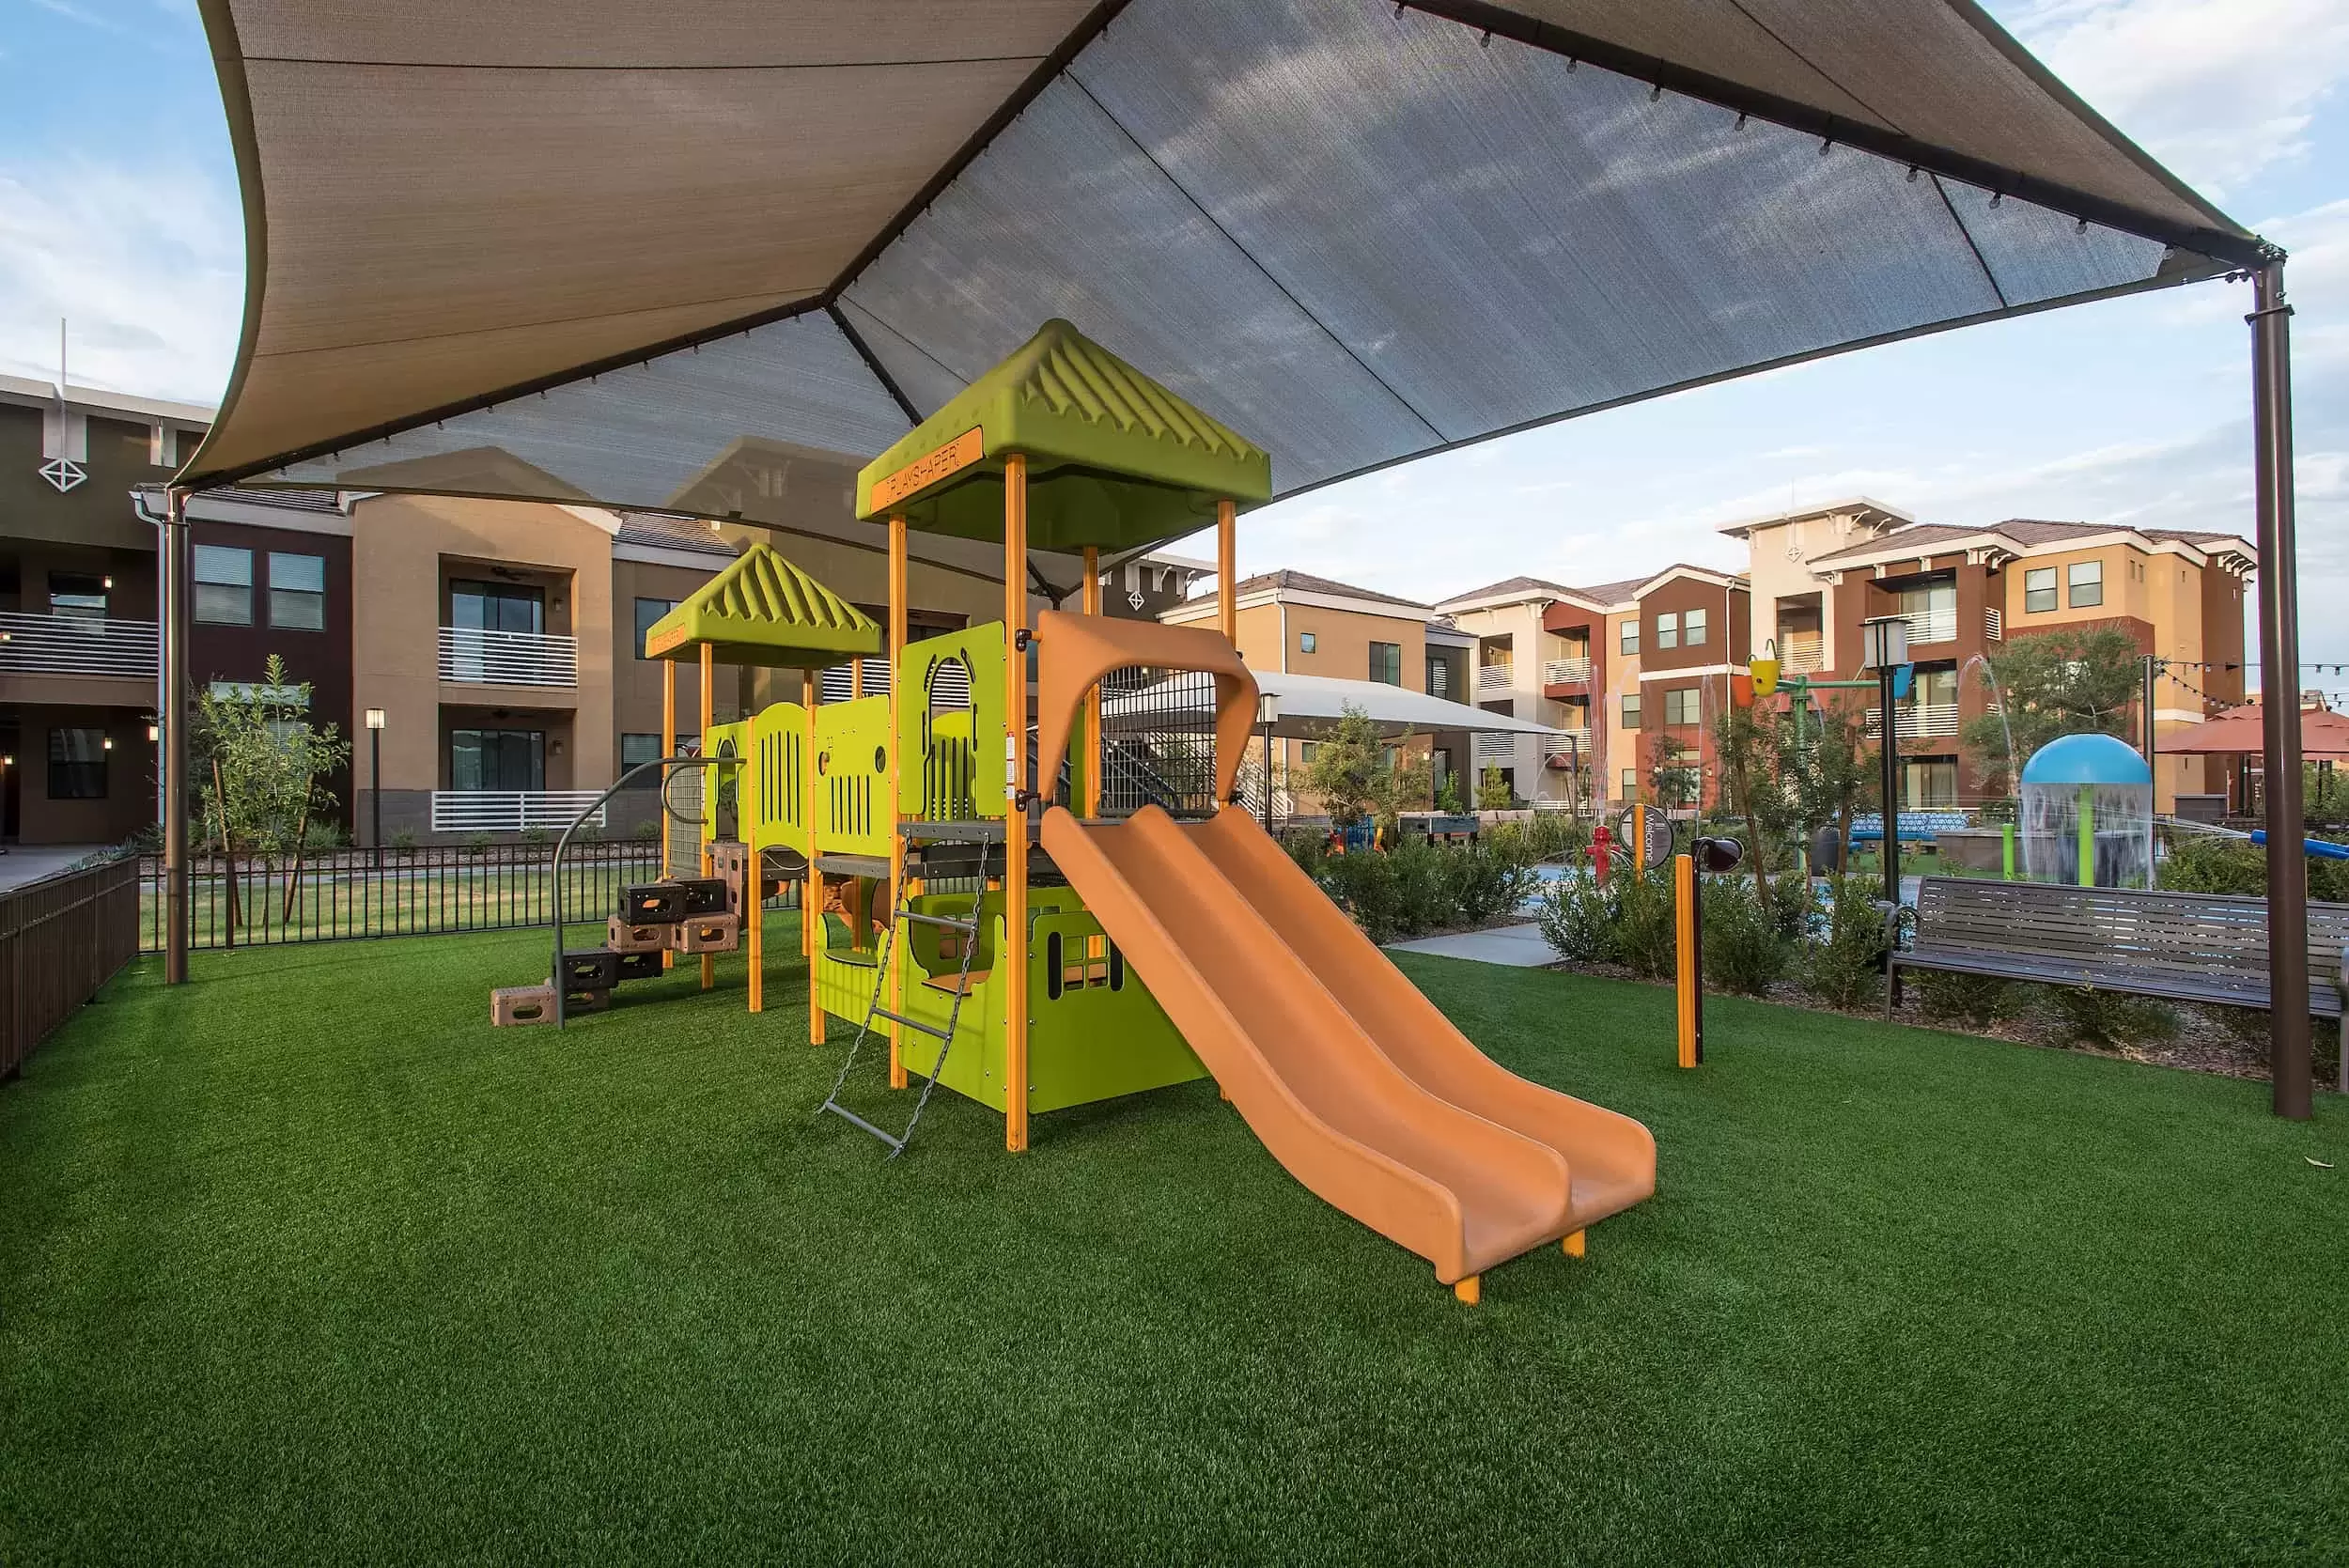 A shaded playground with slides for the children at Liv Northgate.